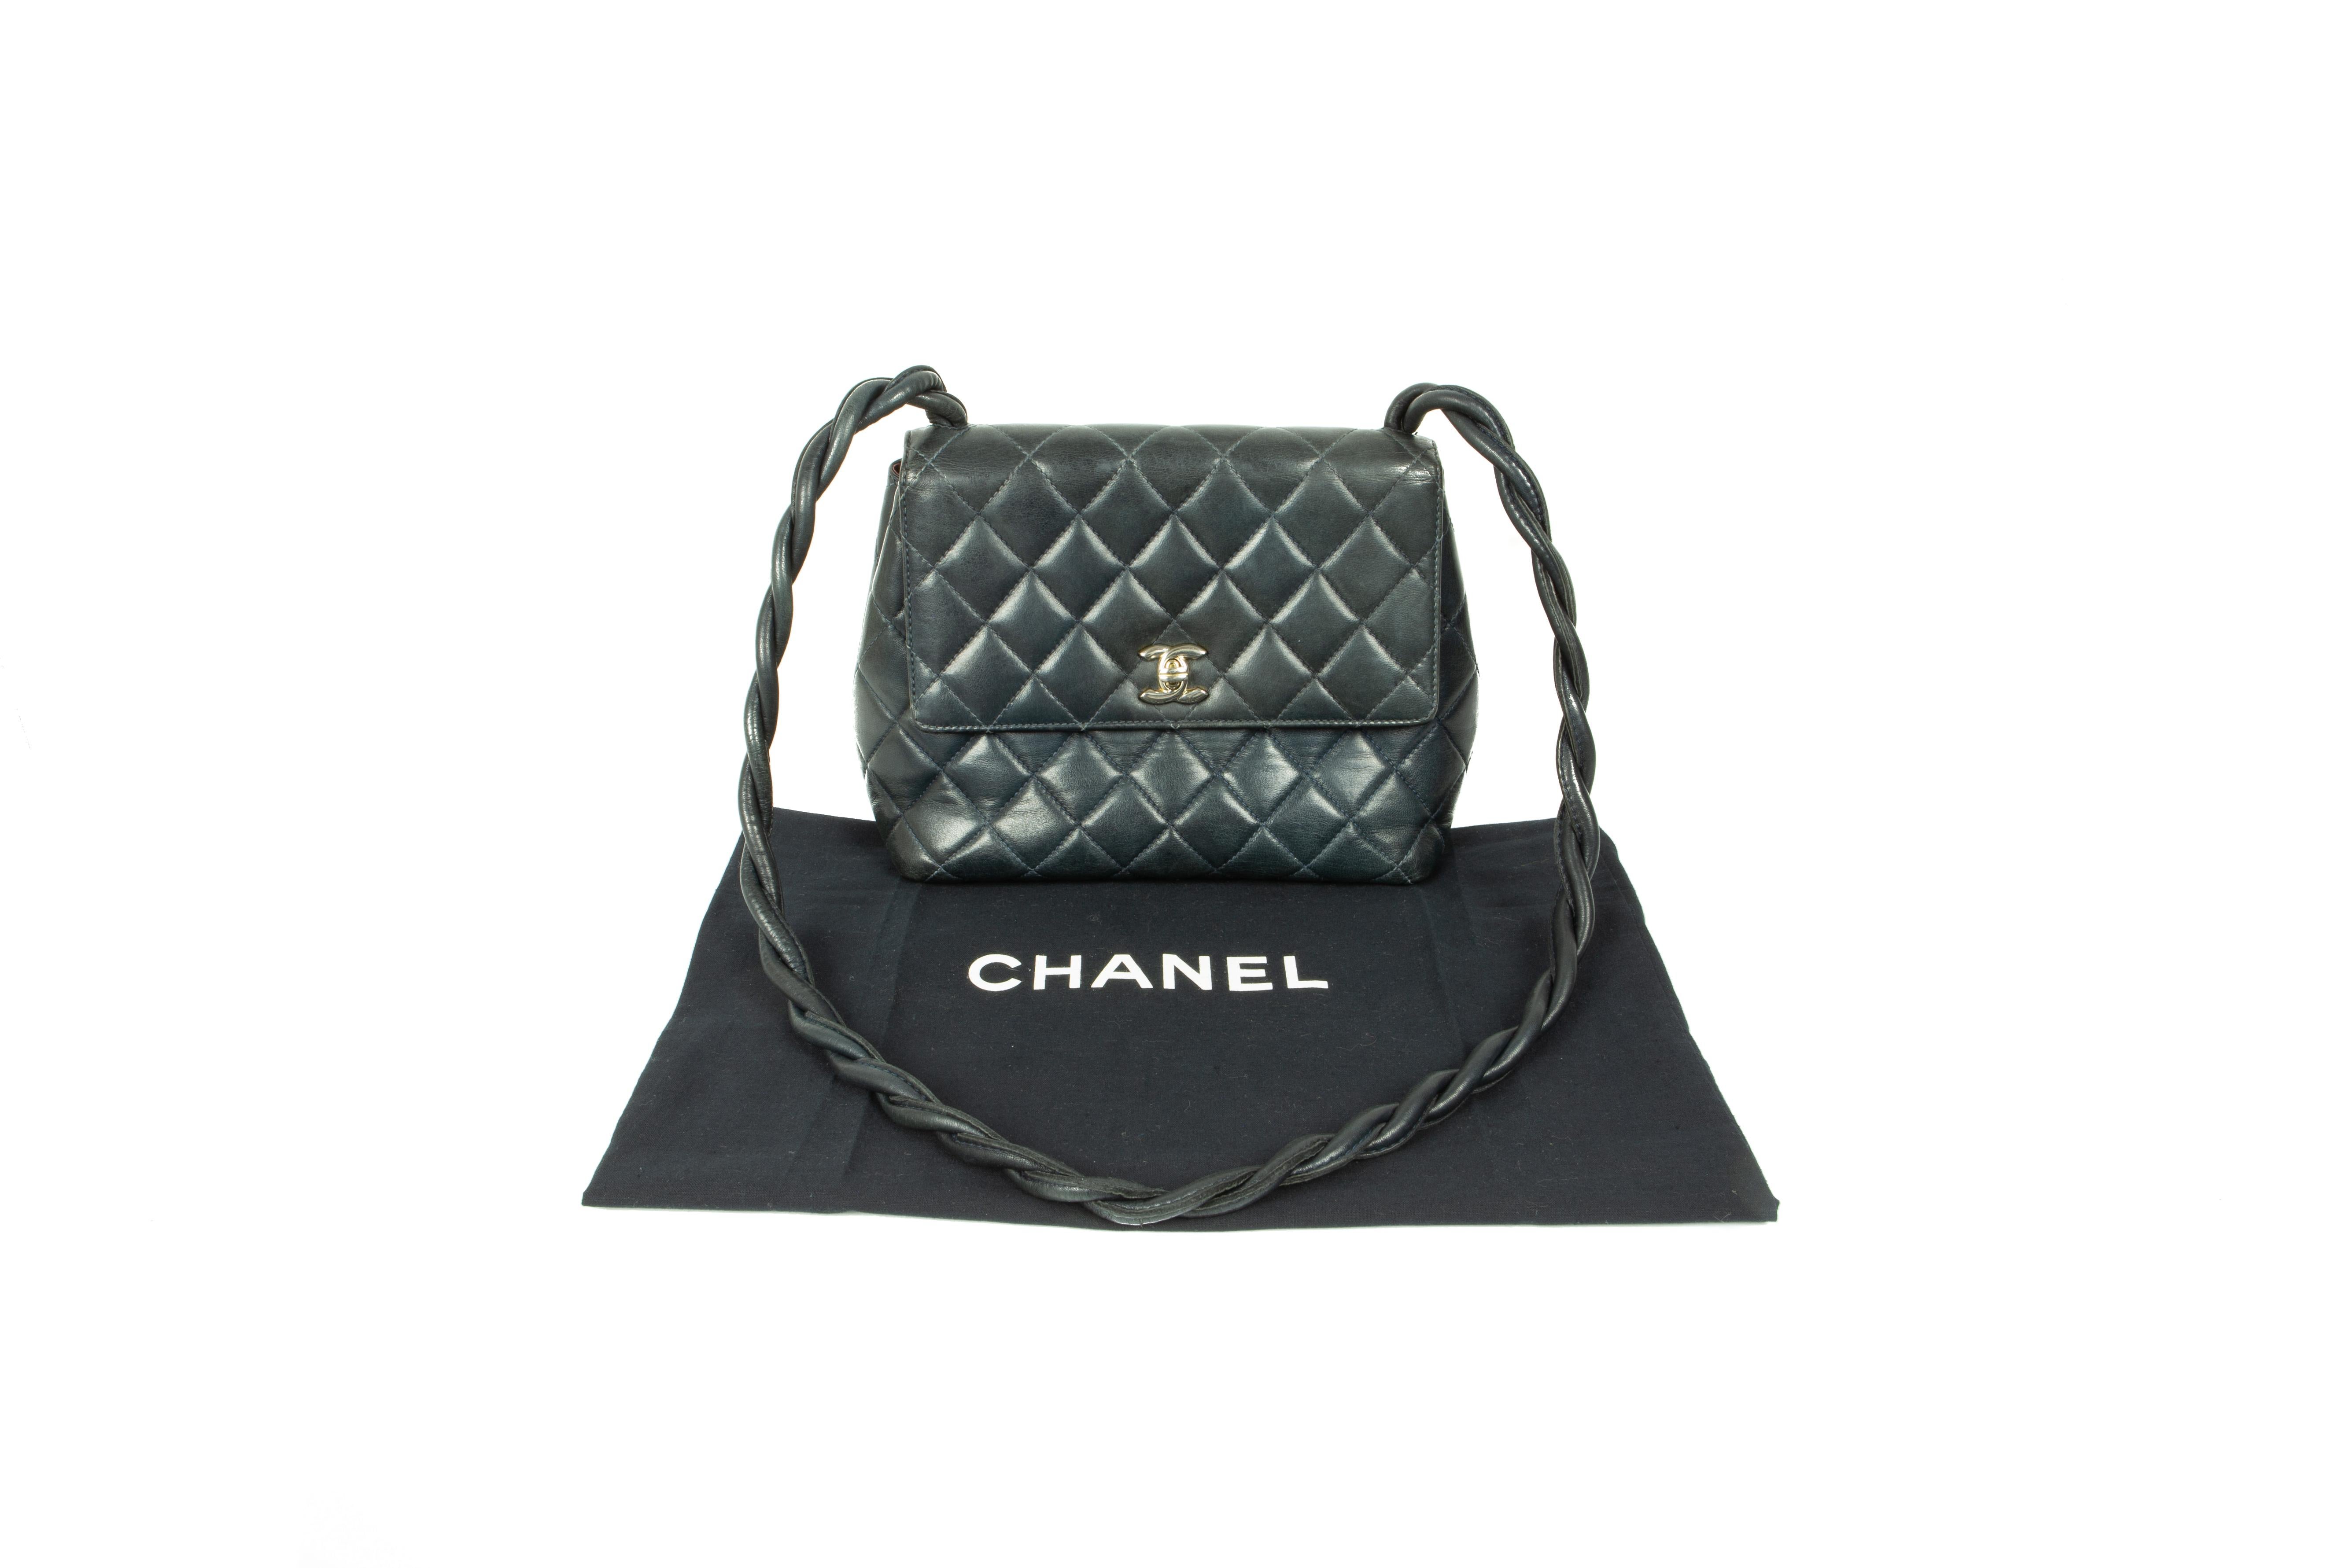 A rare and highly collectable mid-1980s Chanel dark-midnight-blue leather shoulder bag, in the iconic padded and quilted design, comprising of one compartment with one monogram-toggle zipper pocket, one patch pocket and one outer back pocket, fully